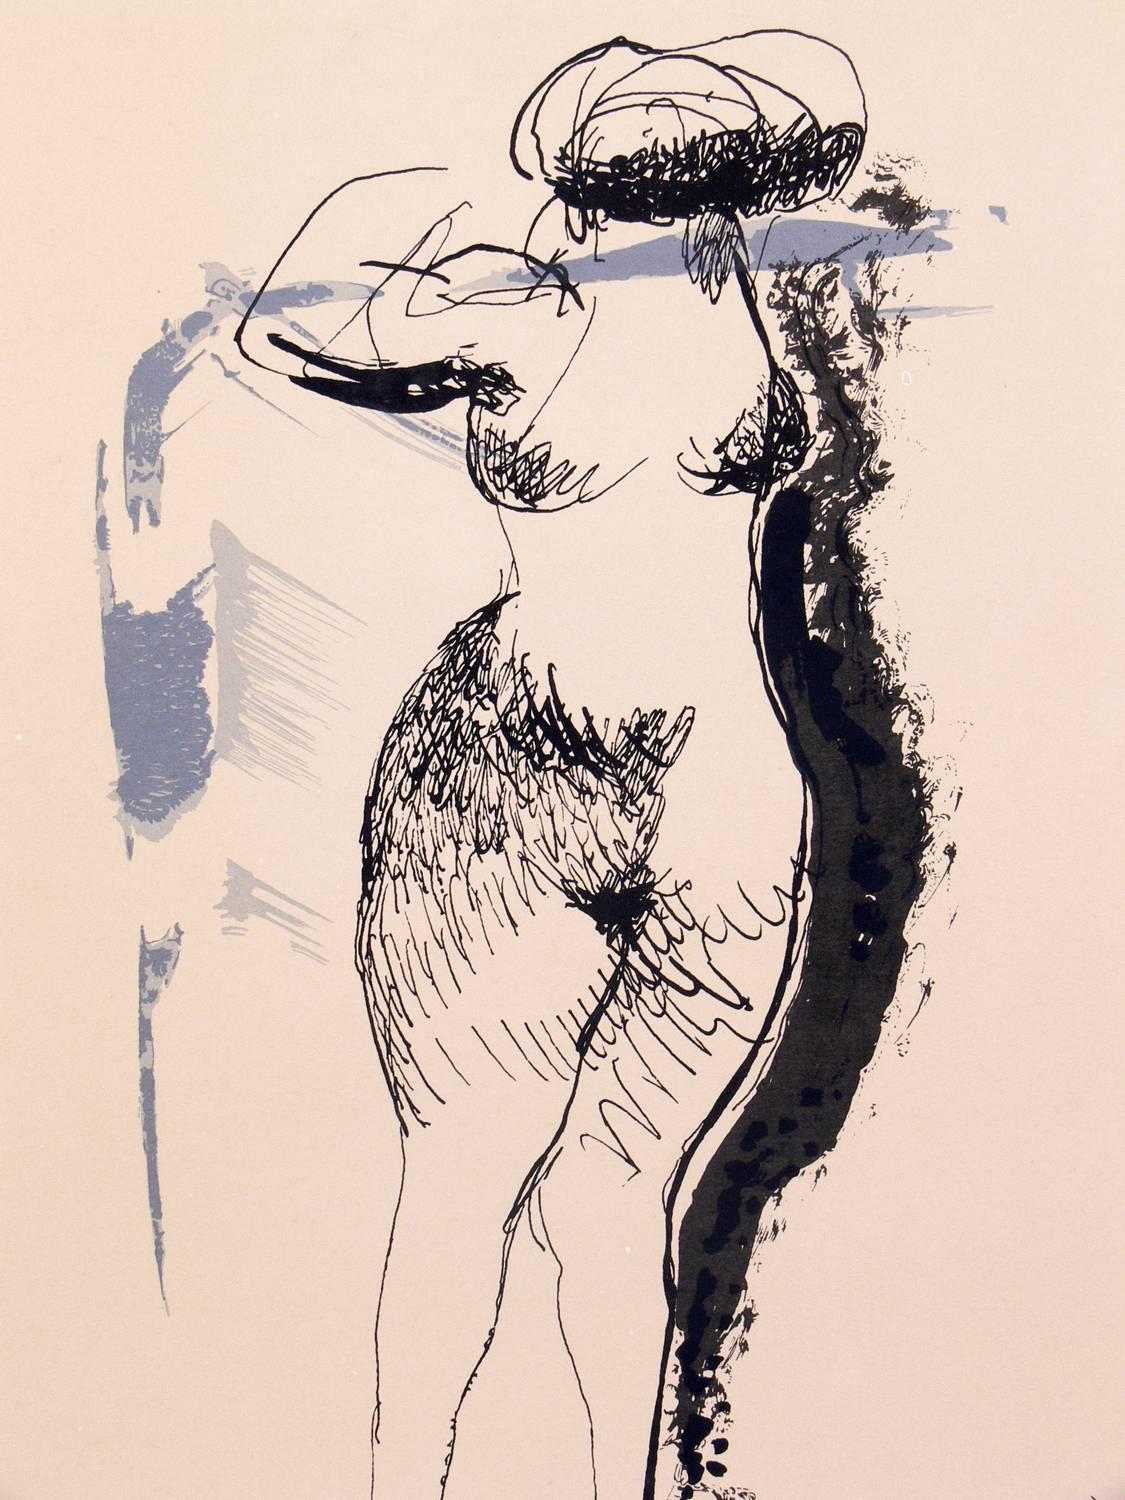 Pair of nude figural lithographs by Marino Marini from the Marino Marini portfolio, printed by Carl Schünemann, Germany, circa 1968. They have been framed in clean lined black lacquer gallery frames.